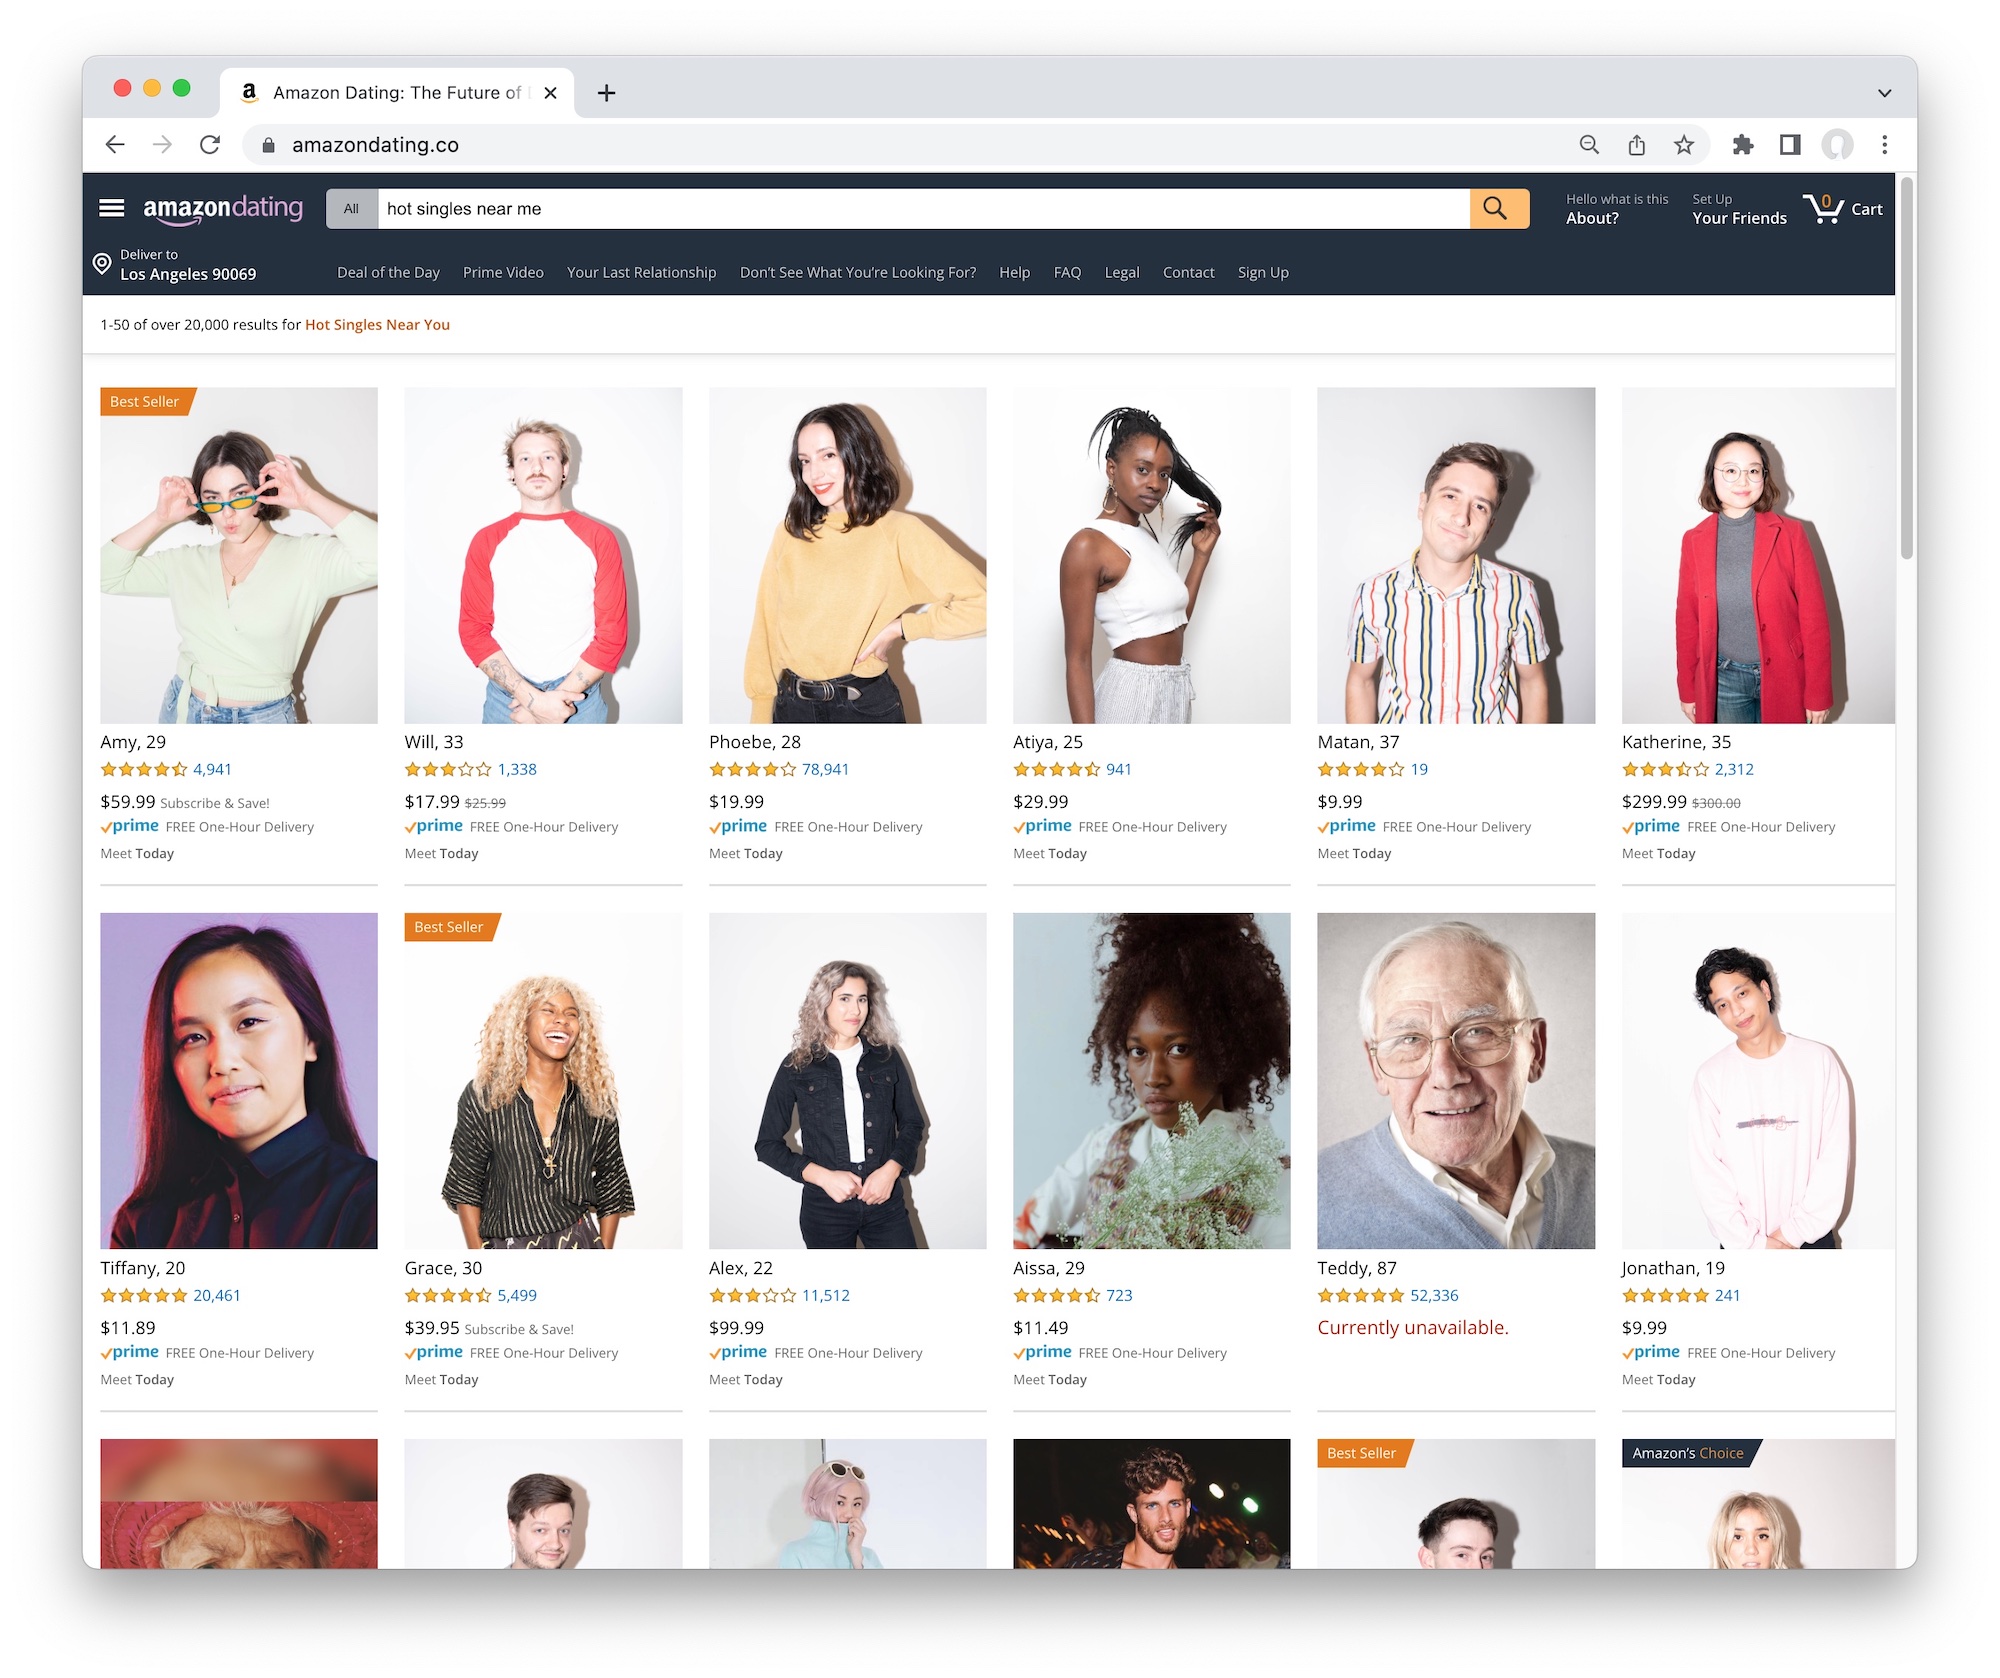 Screenshot of “Amazon Dating”, a satirical website where you browse for dates as if you were shopping on Amazon